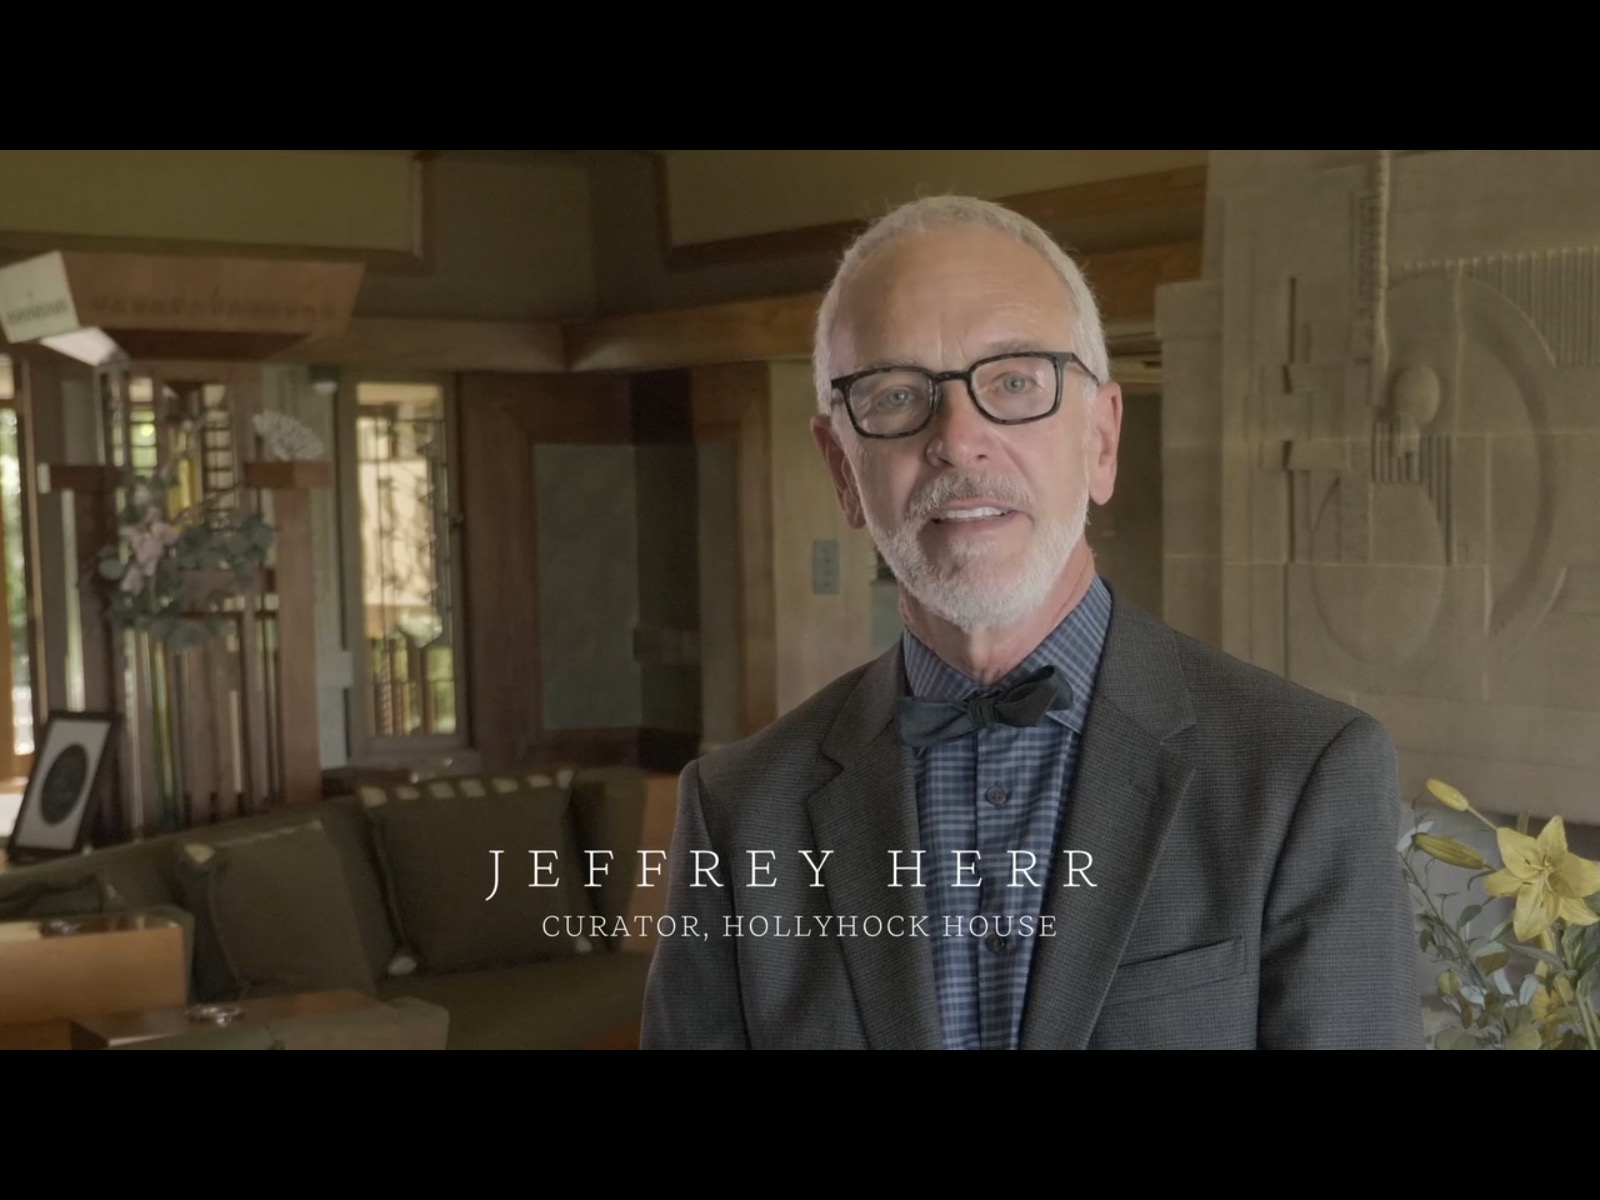 Jeffrey Herr, curator of the Hollyhock House is wearing a suit, bowtie and black eyeglasses and staring directly at the camera.  He is standing in a large room with sand colored walls and a green couch behind him.